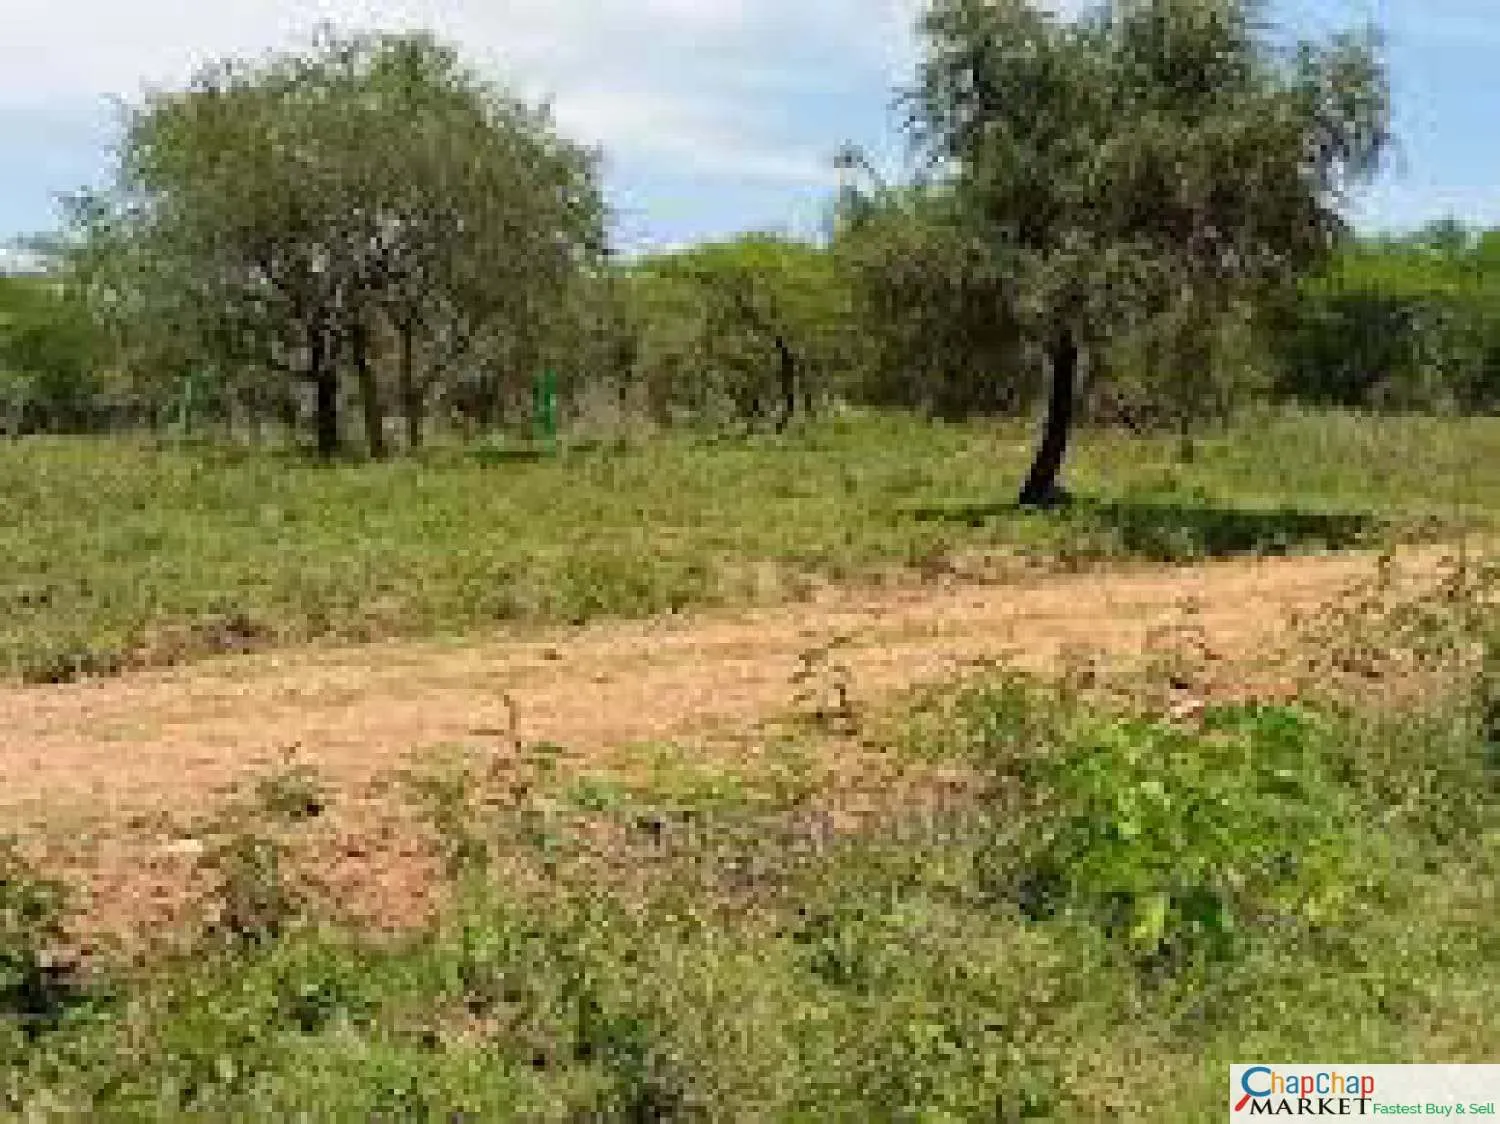 Land For Sale 42 Acres in Kajiado County 350K PER ACRE QUICKEST SALE Ready Title Deed EXCLUSIVE